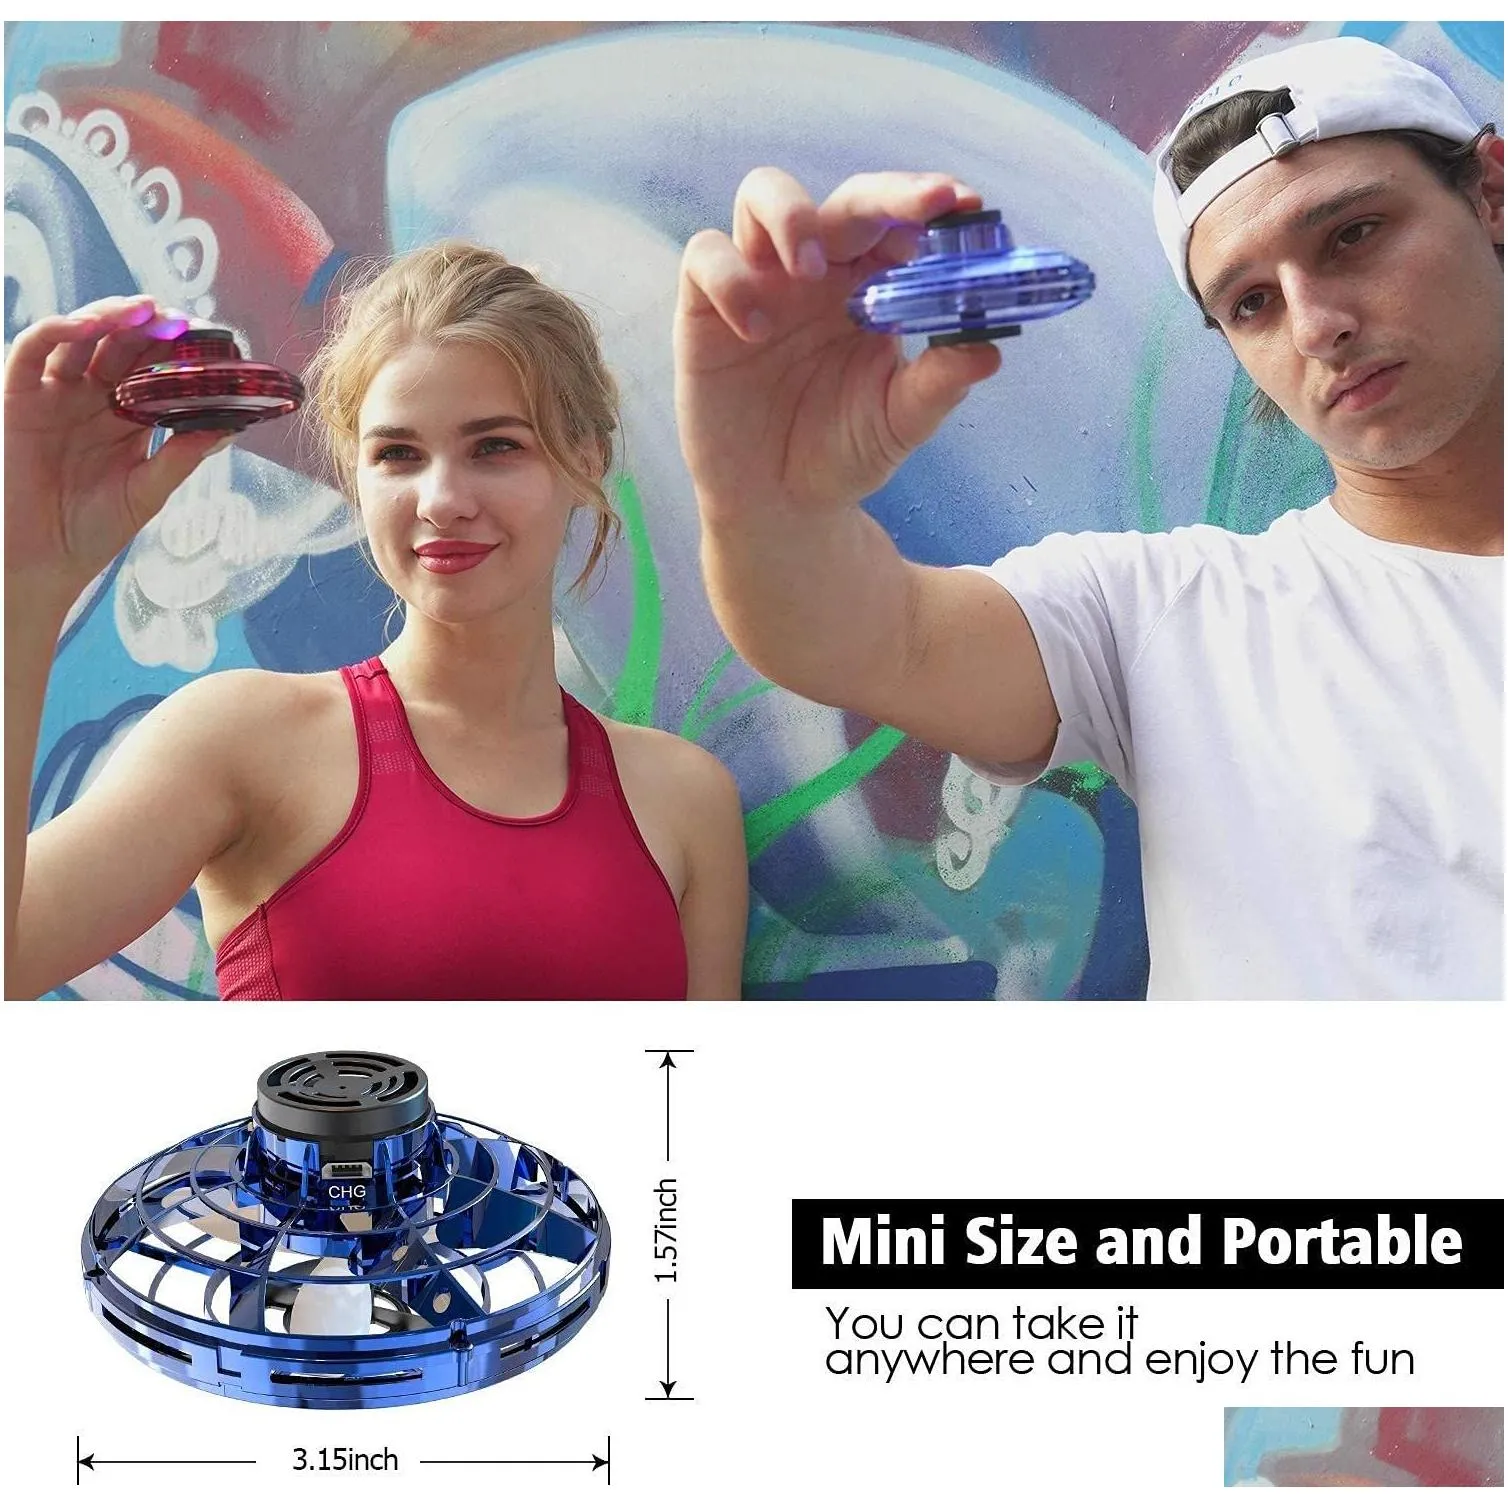 Magic Balls Ifly The Most Trickedout Flying Spinner Hand Operated Drones For Kids Or Adts Ufo Toy With 360° Rotating And Shinning Rg